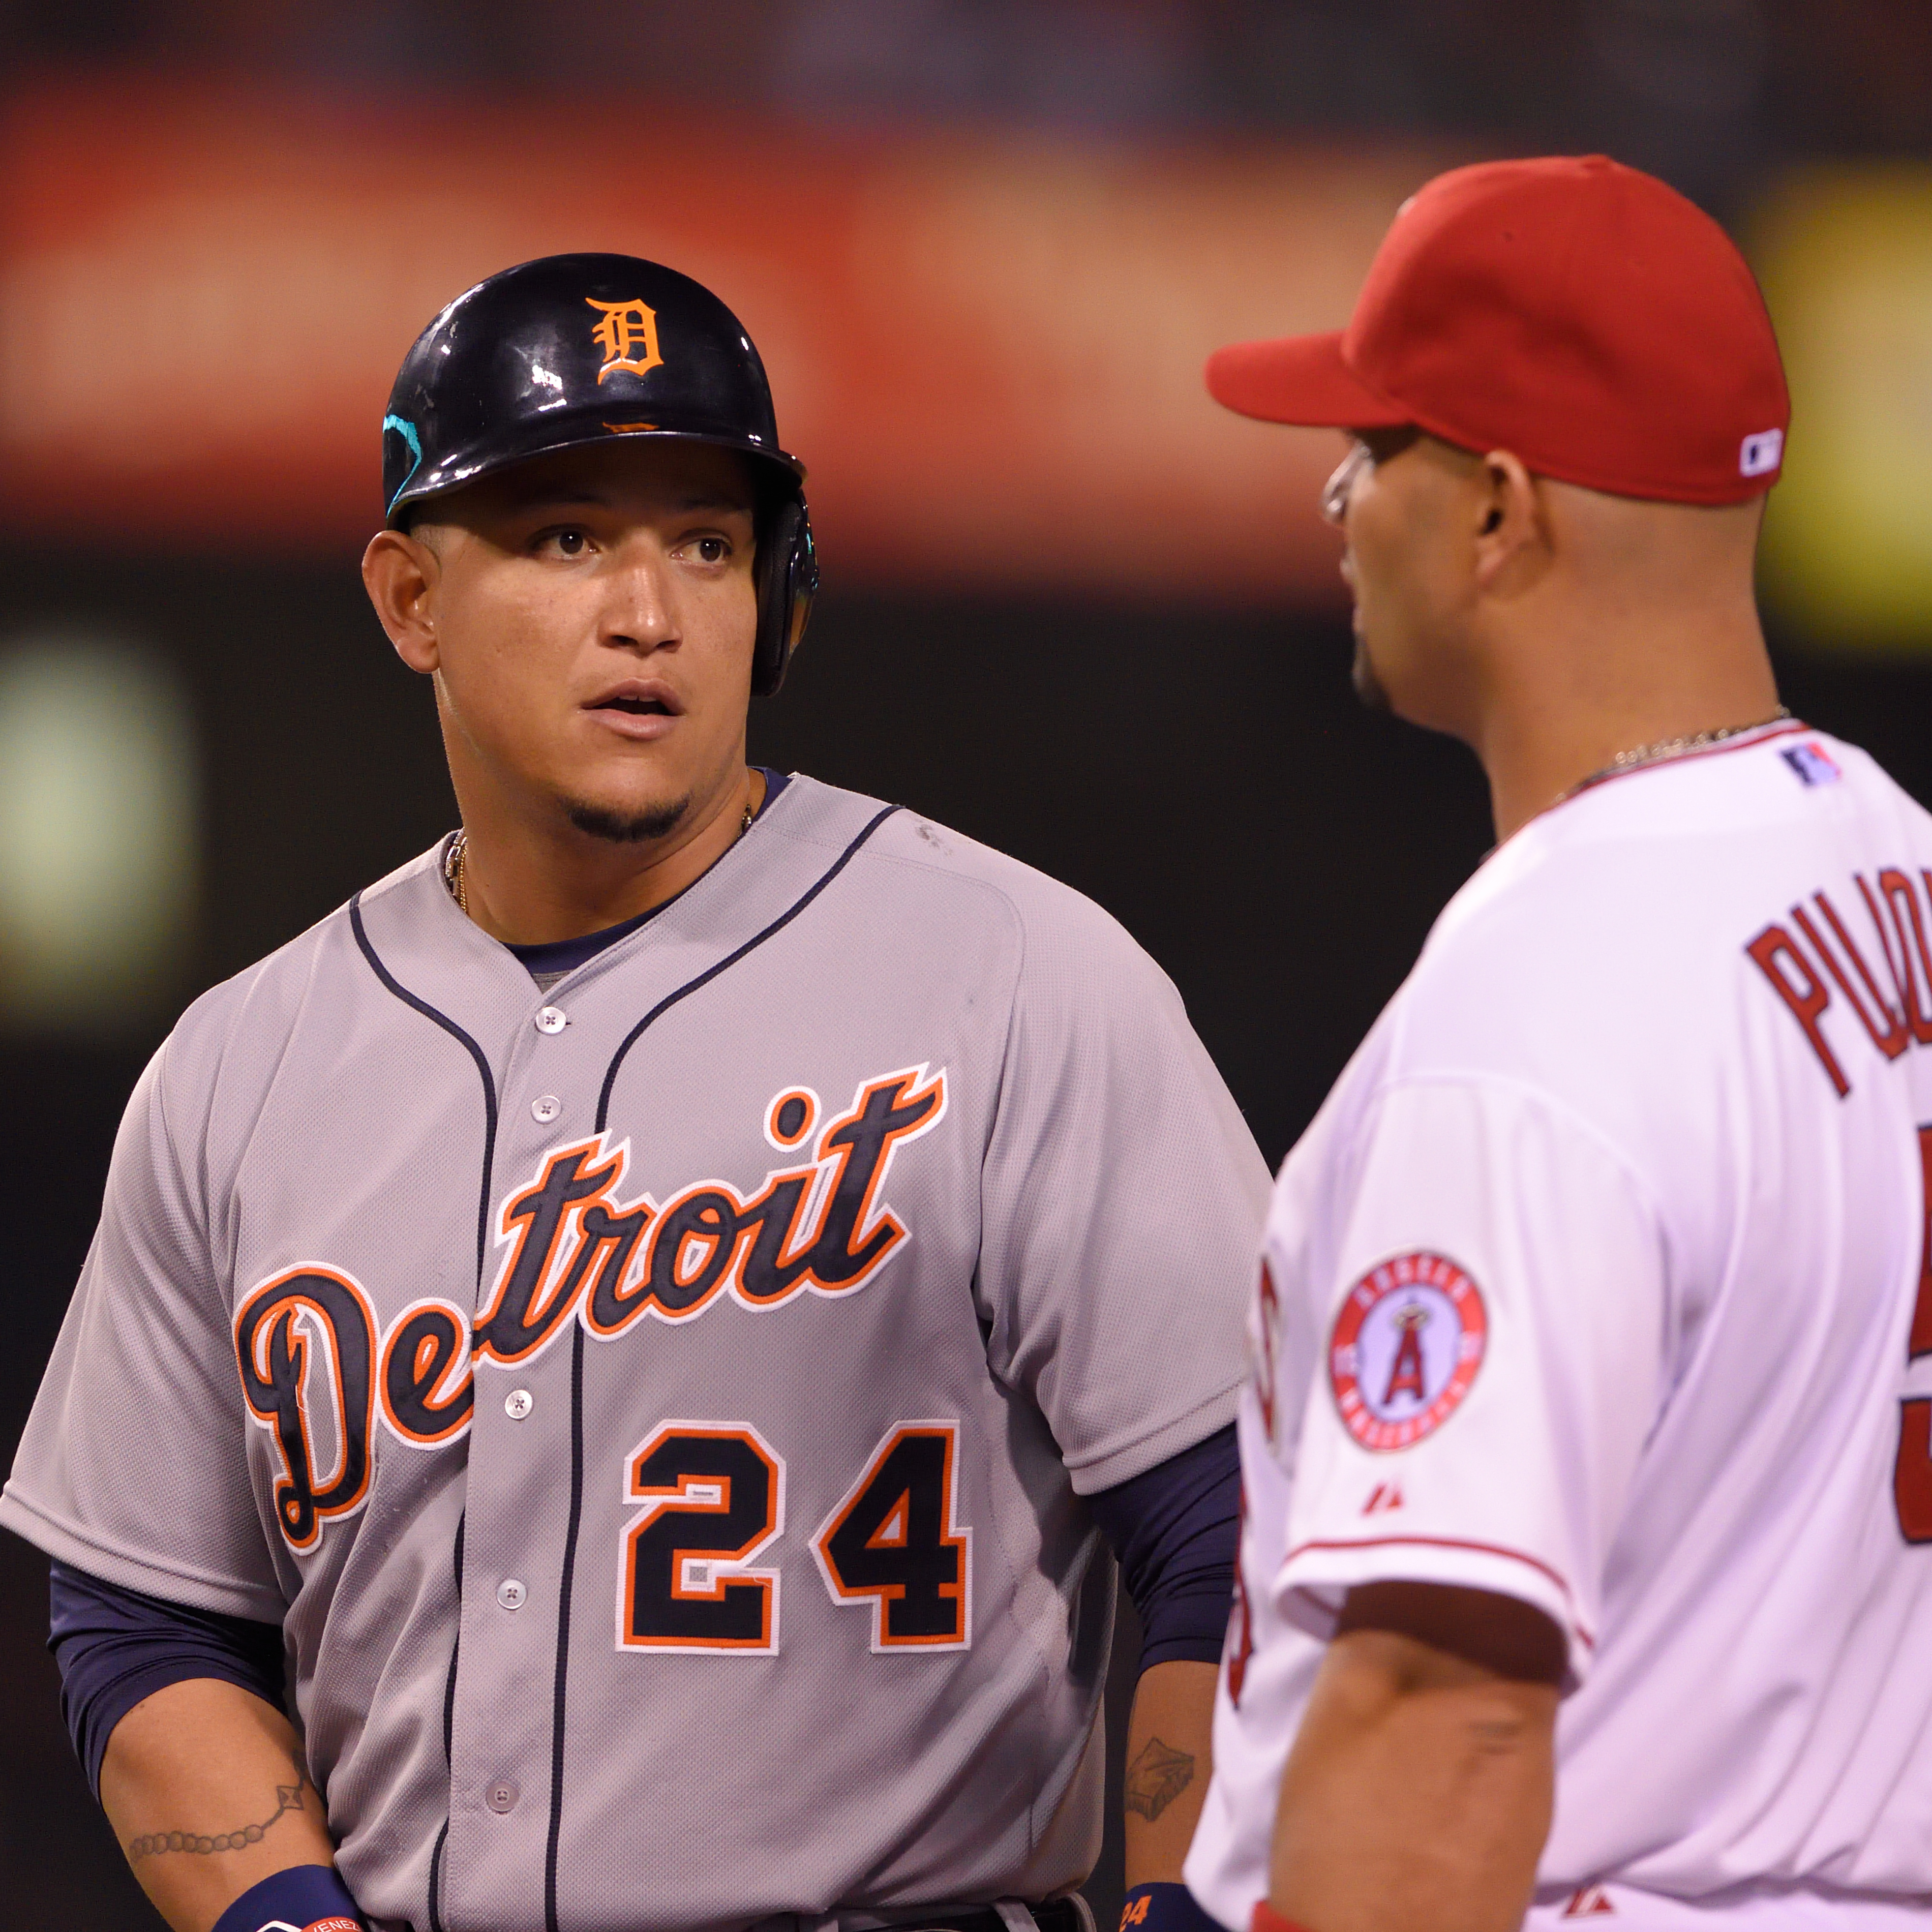 Albert Pujols, Miguel Cabrera Named to 2022 MLB All-Star Game by Commissioner